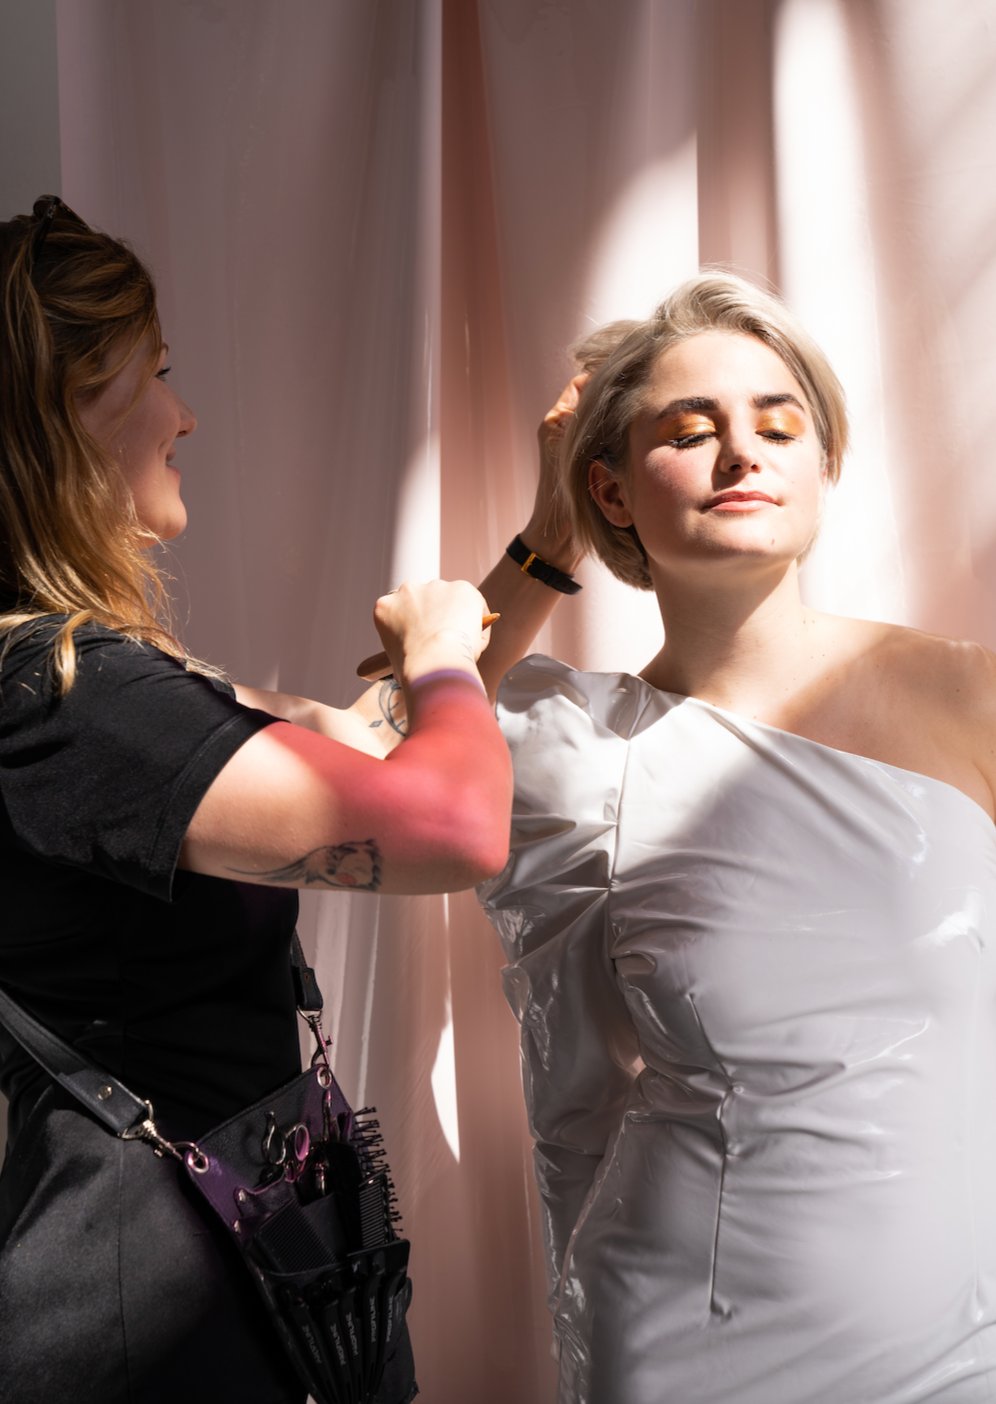 "Time to Shine" Make-Up Workshop with Marie-Jo in Berlin, Germany by subcultours